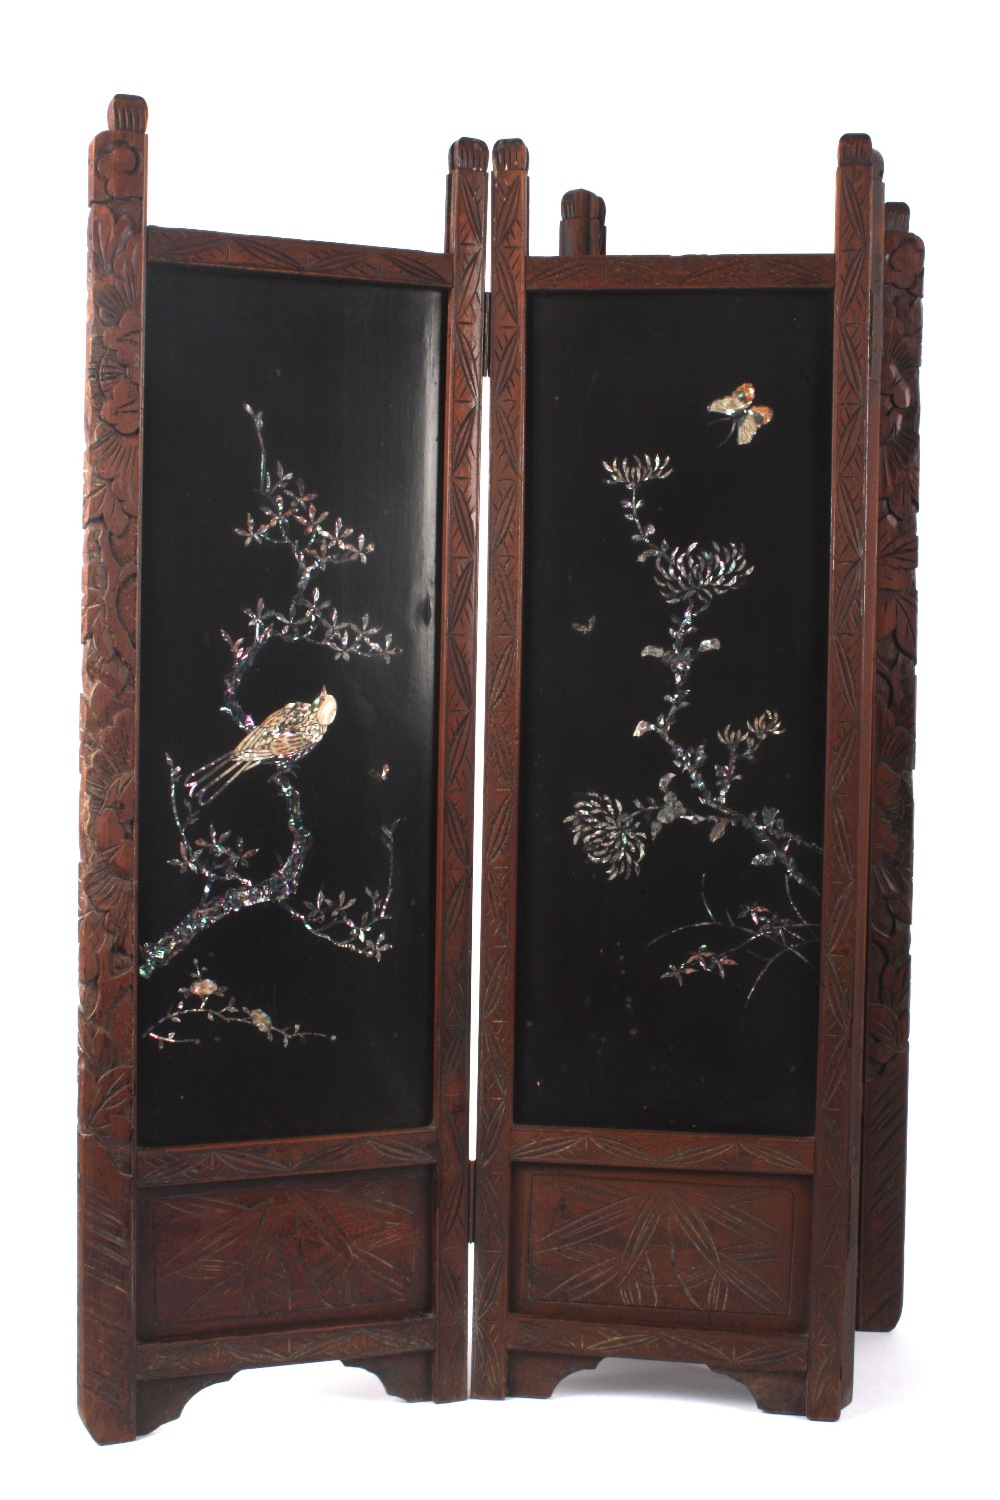 A small early 20th century Japanese Shibyama four fold table screen, each panel inlaid with birds - Image 3 of 3